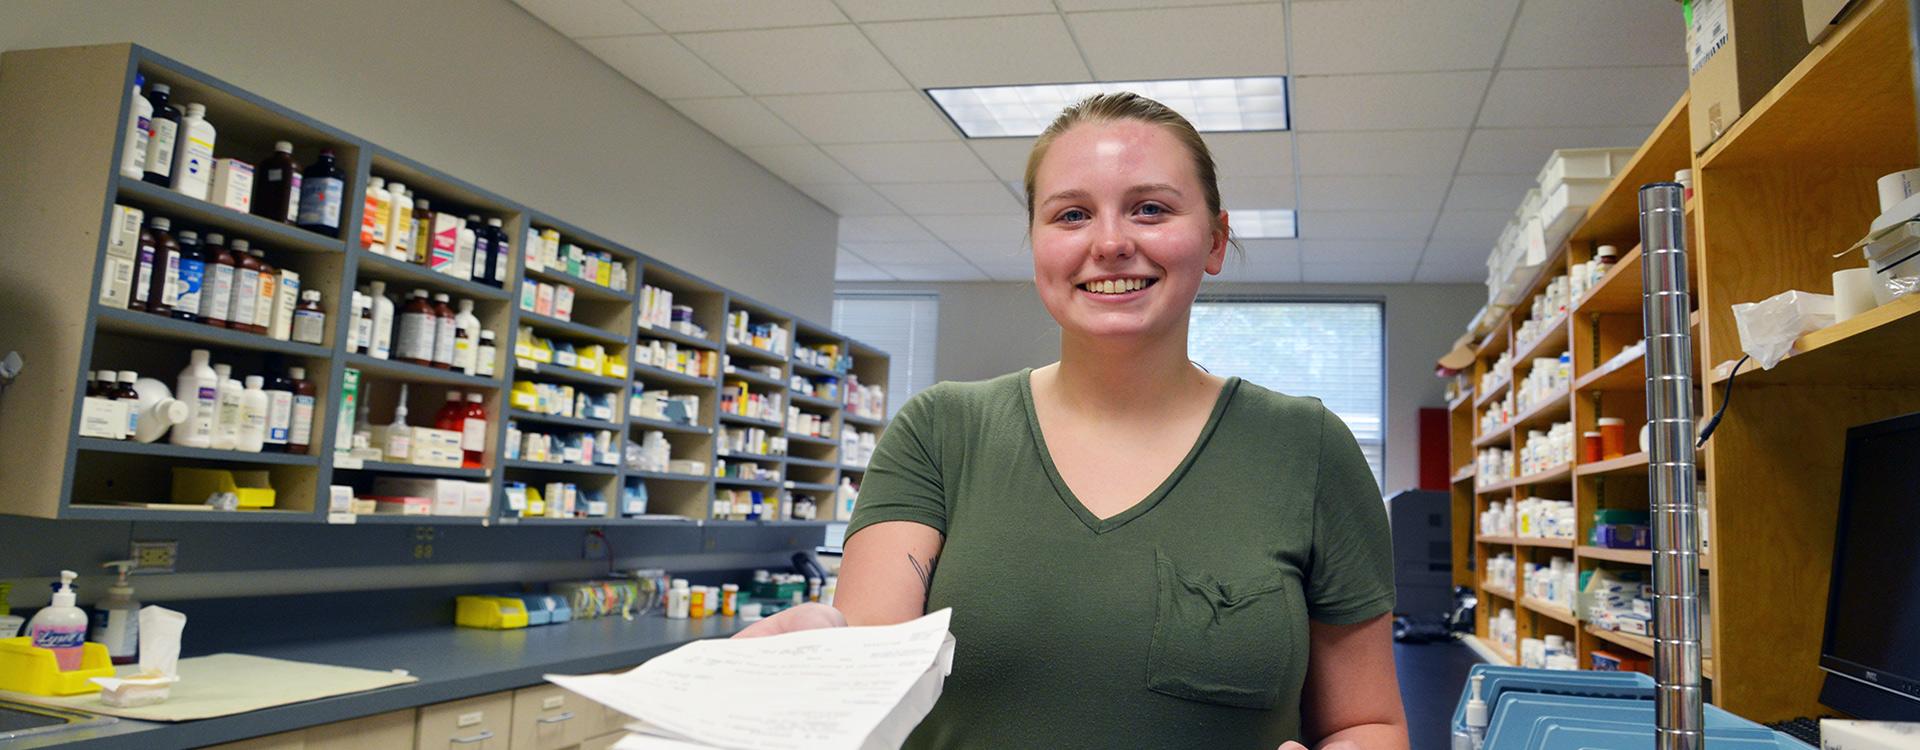 student working in pharmacy lab extends a filled prescription